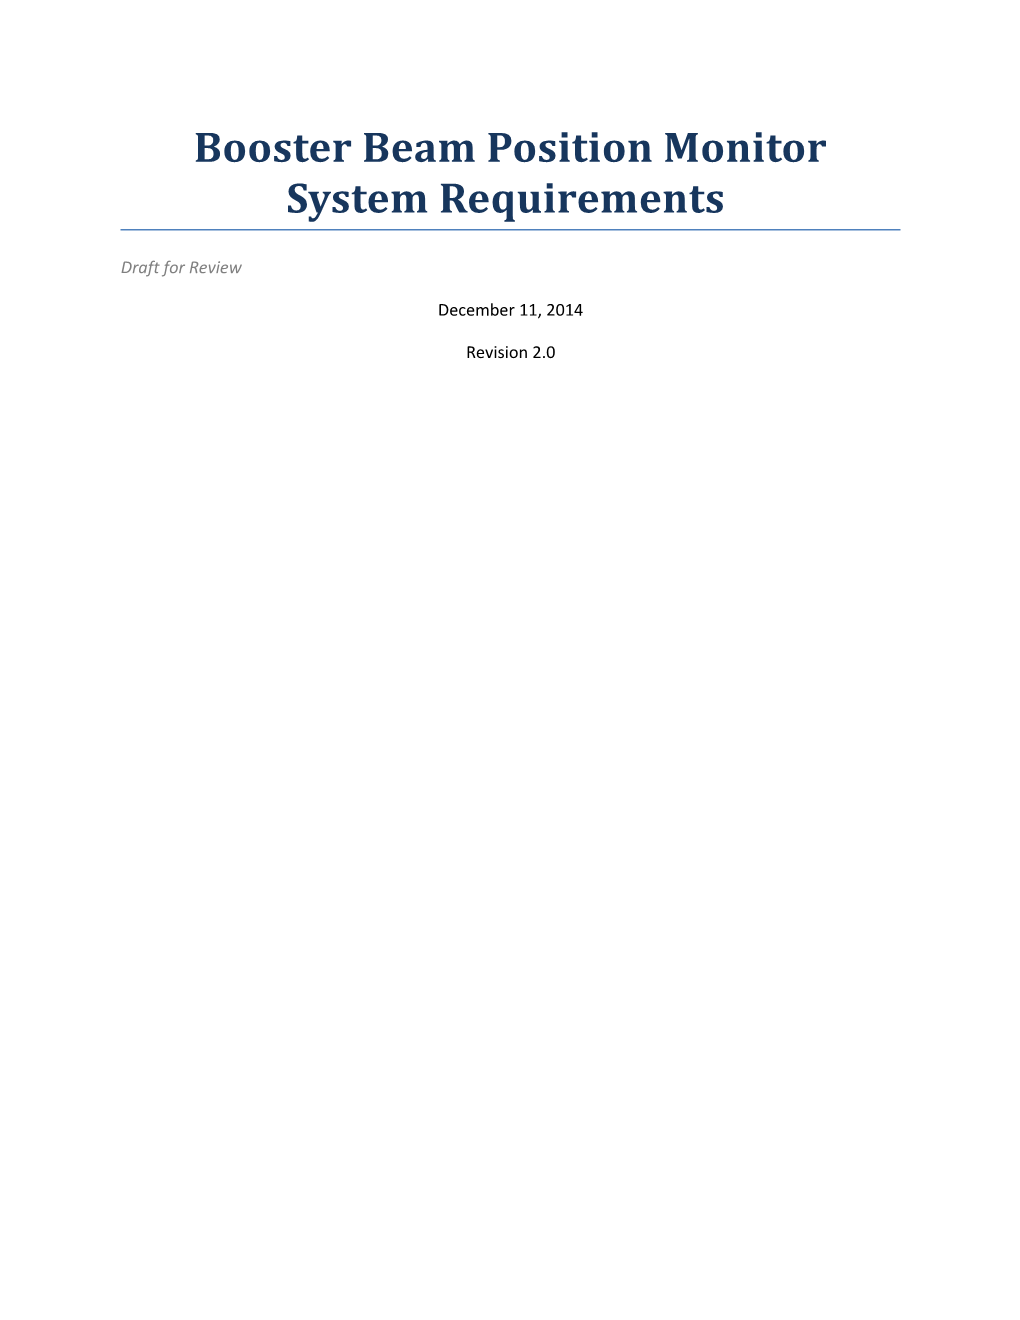 Booster Beam Position Monitor System Requirements